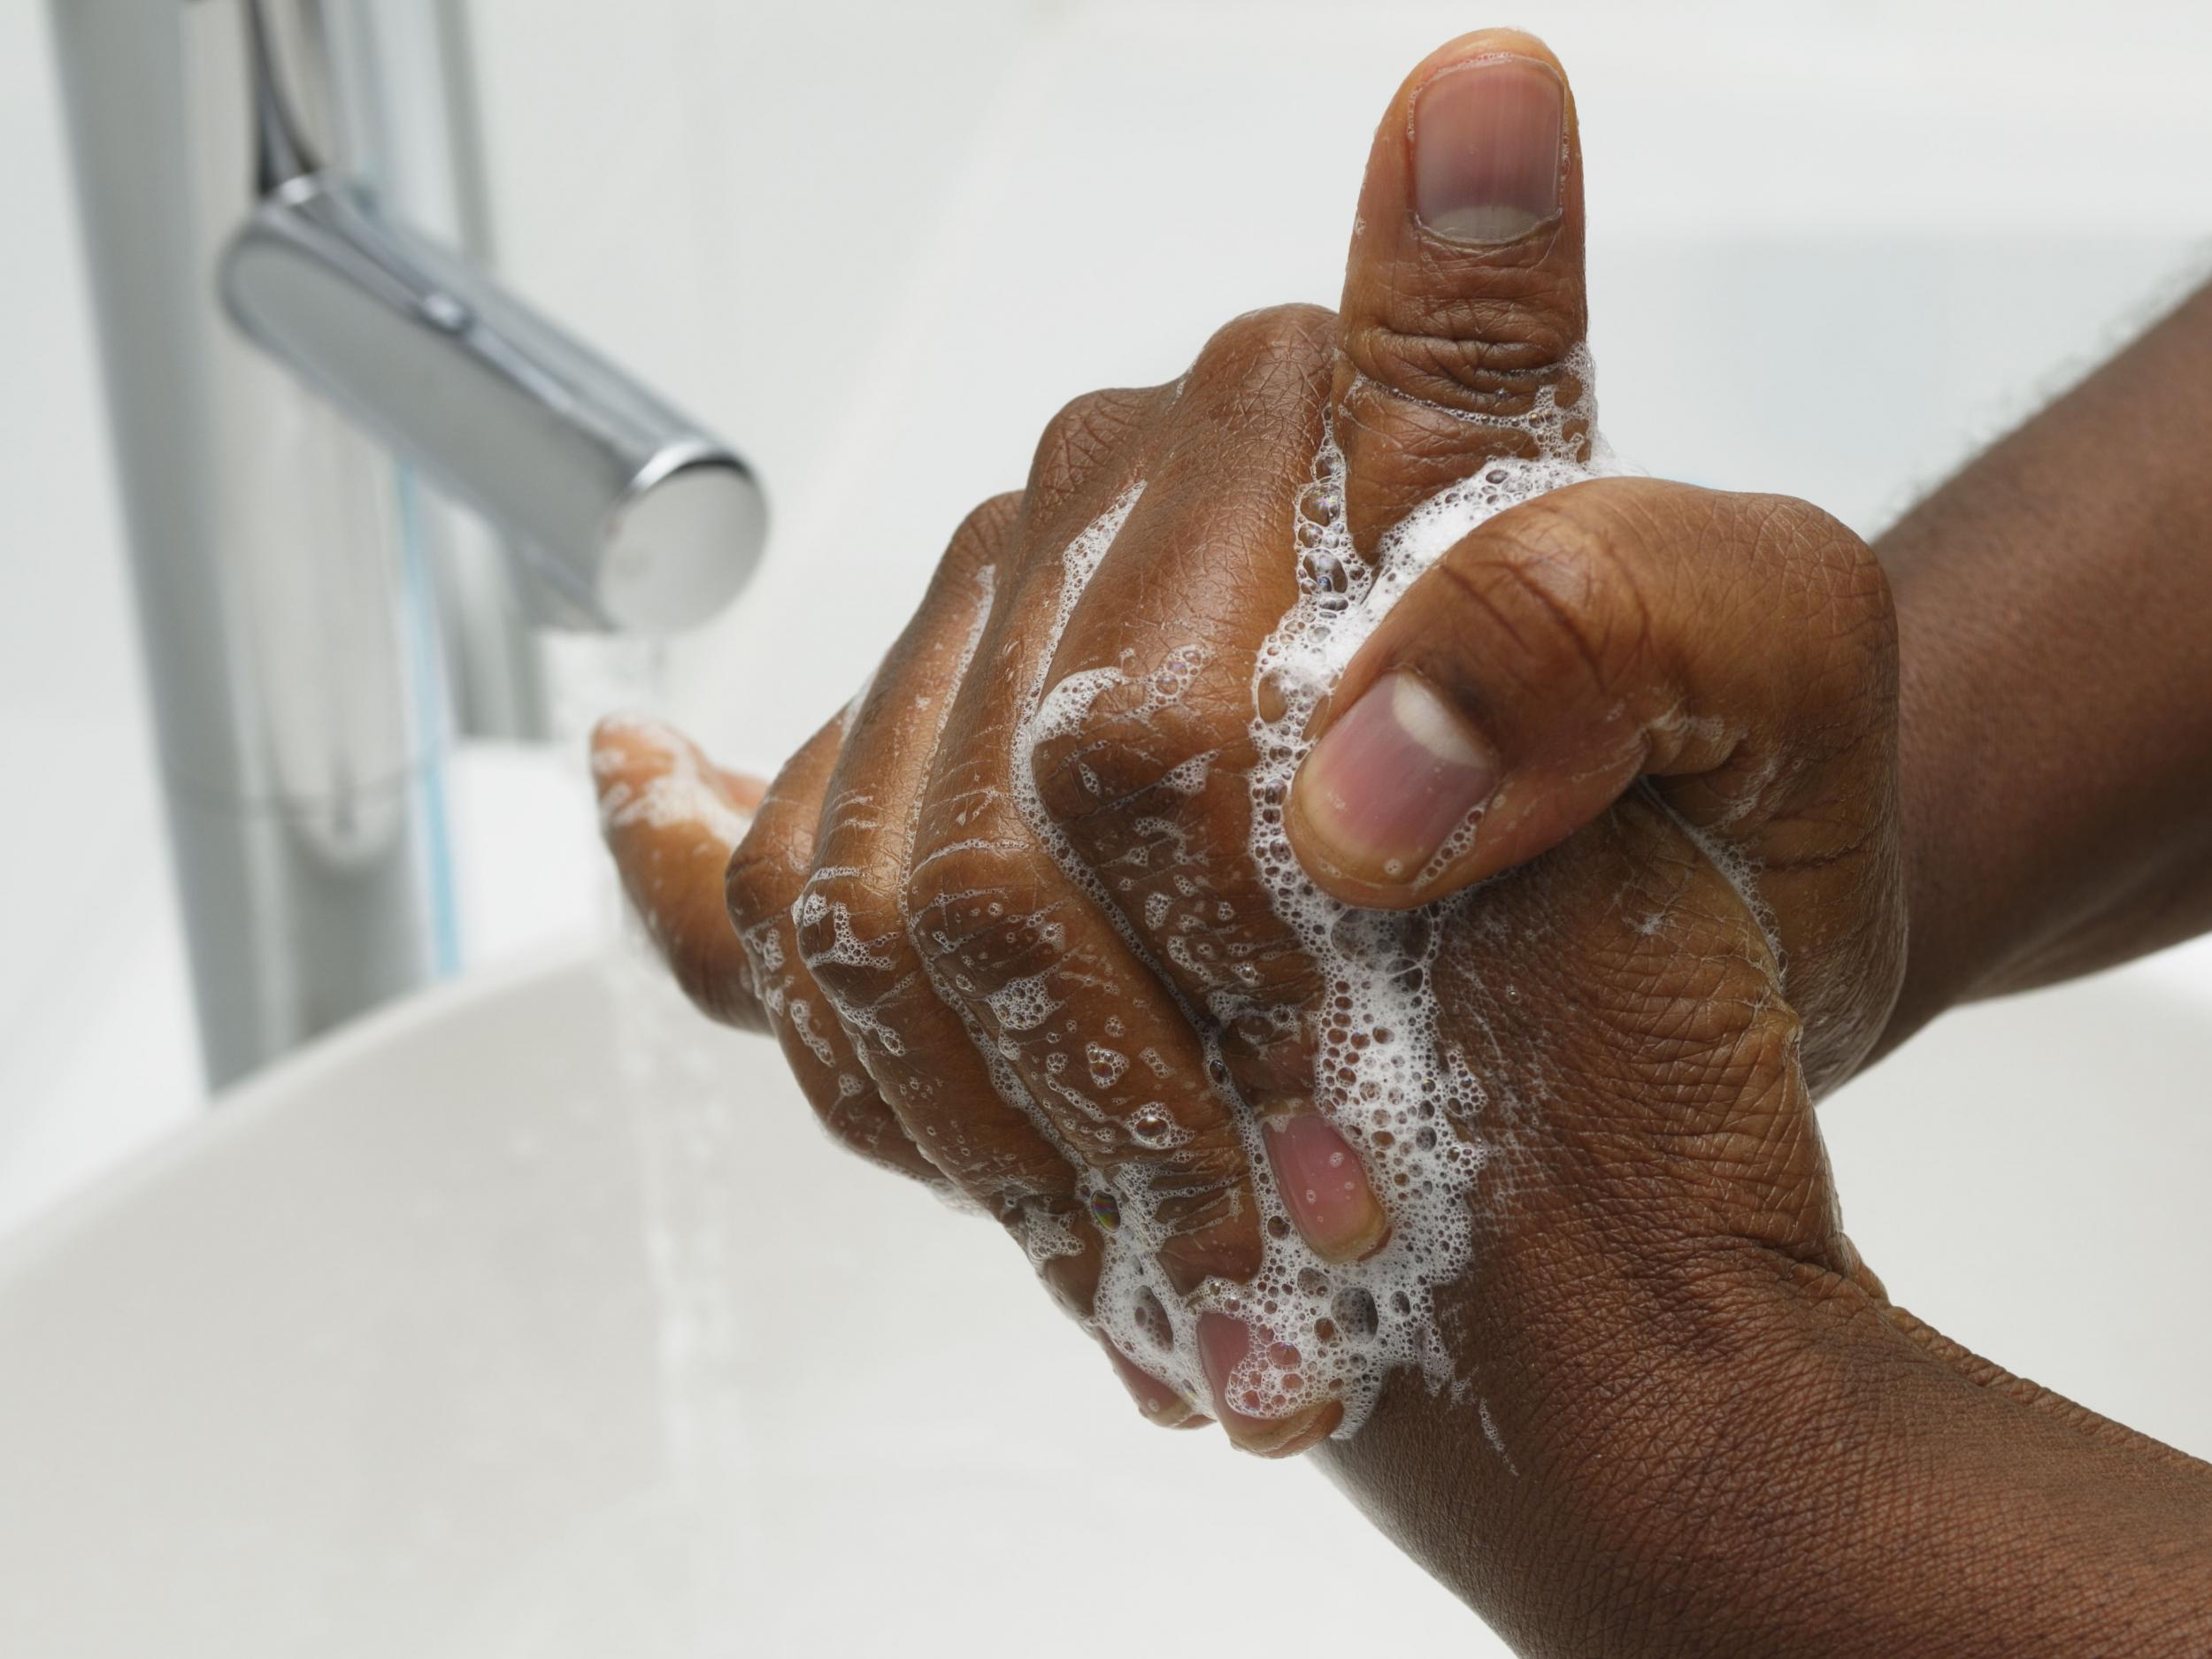 Adults are now washing their hands nine times a day on average